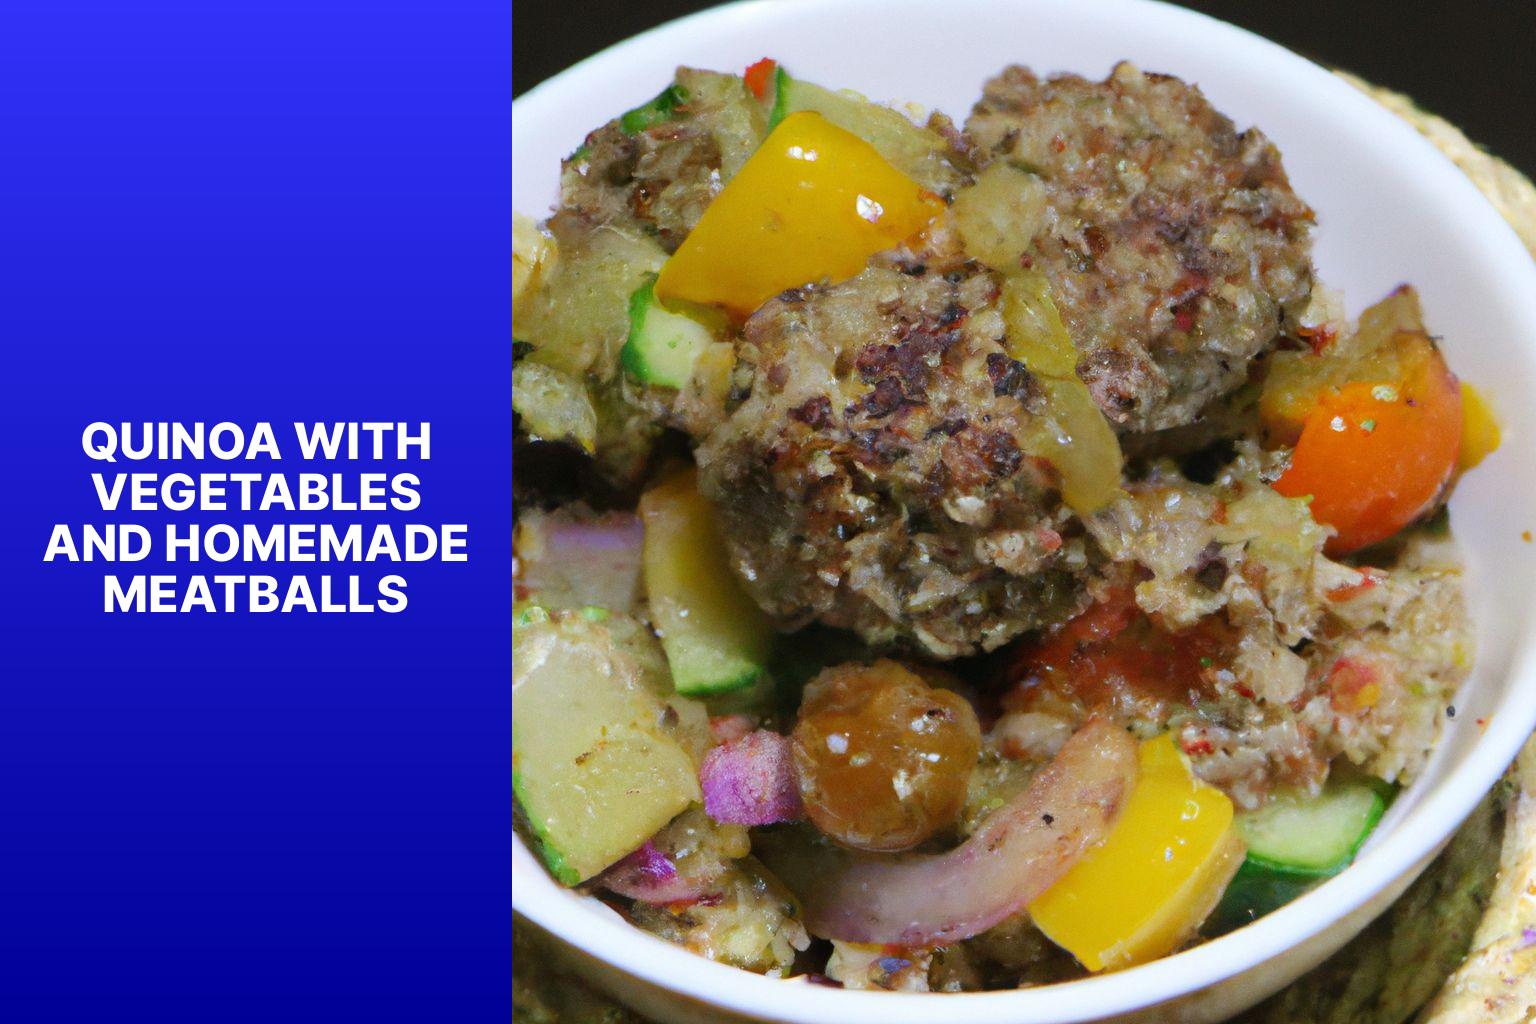 Quinoa with Vegetables and Homemade Meatballs